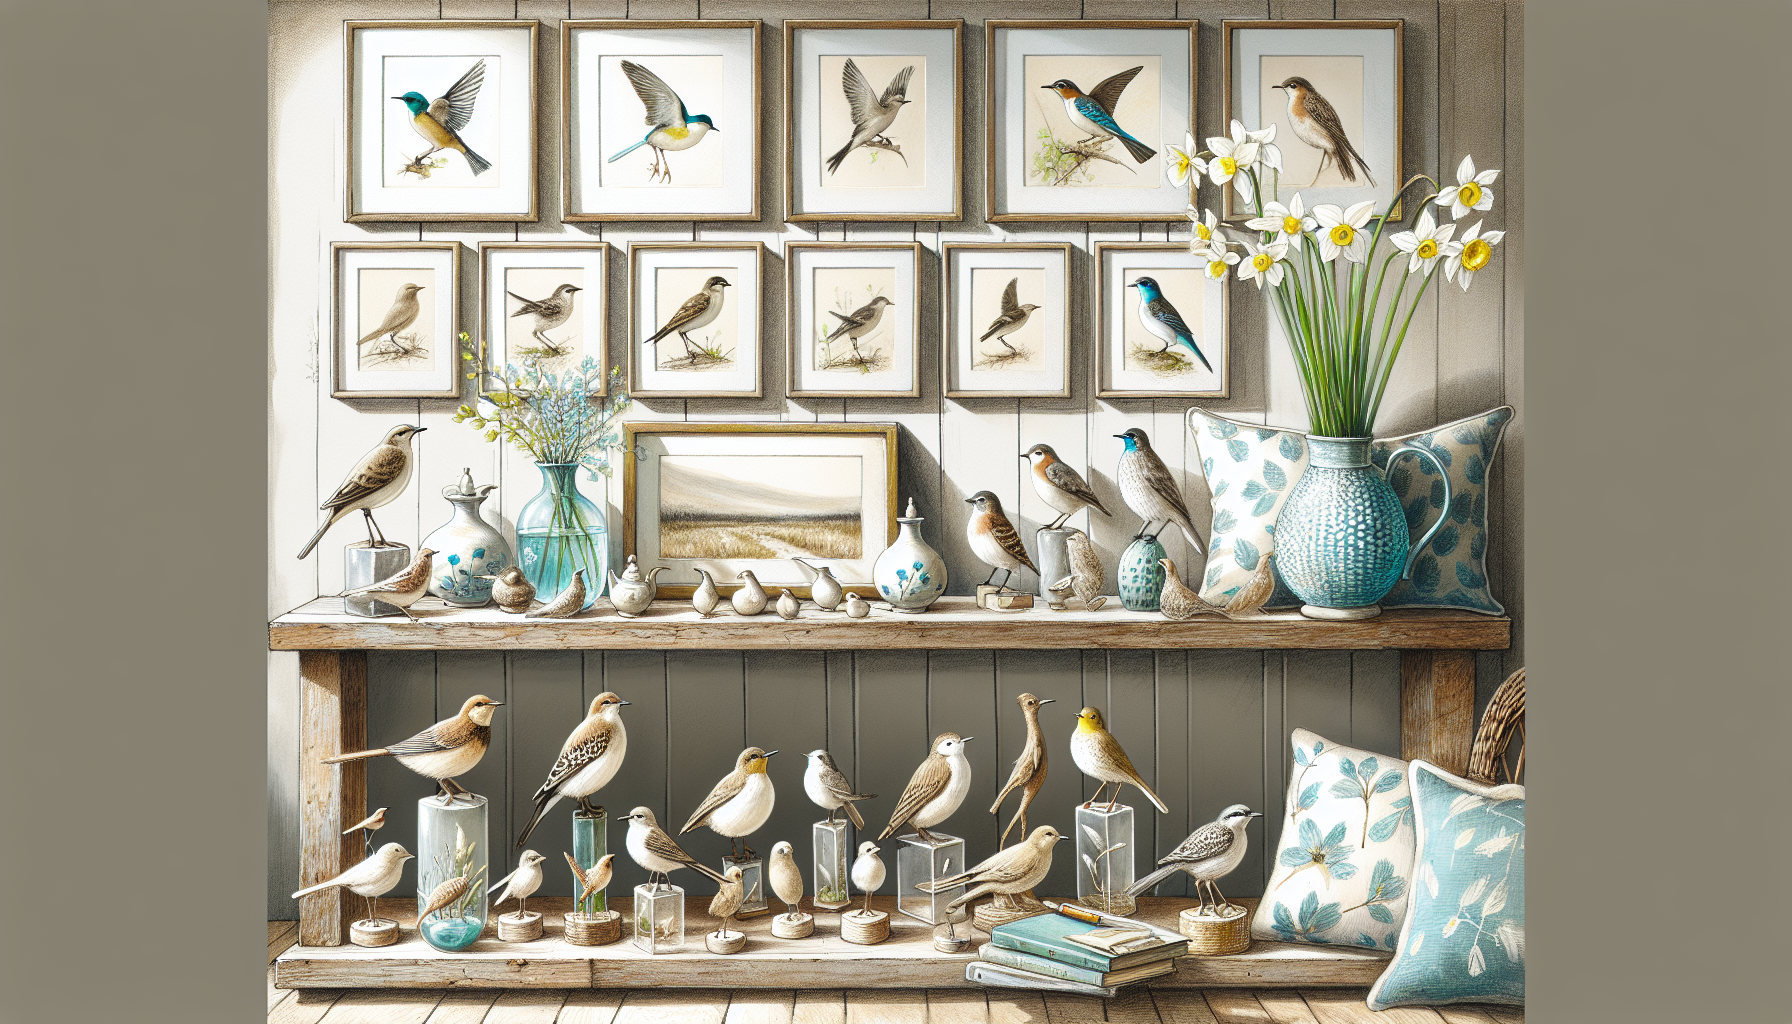 A curated display of bird-themed accents including figurines, gallery walls, and accessories